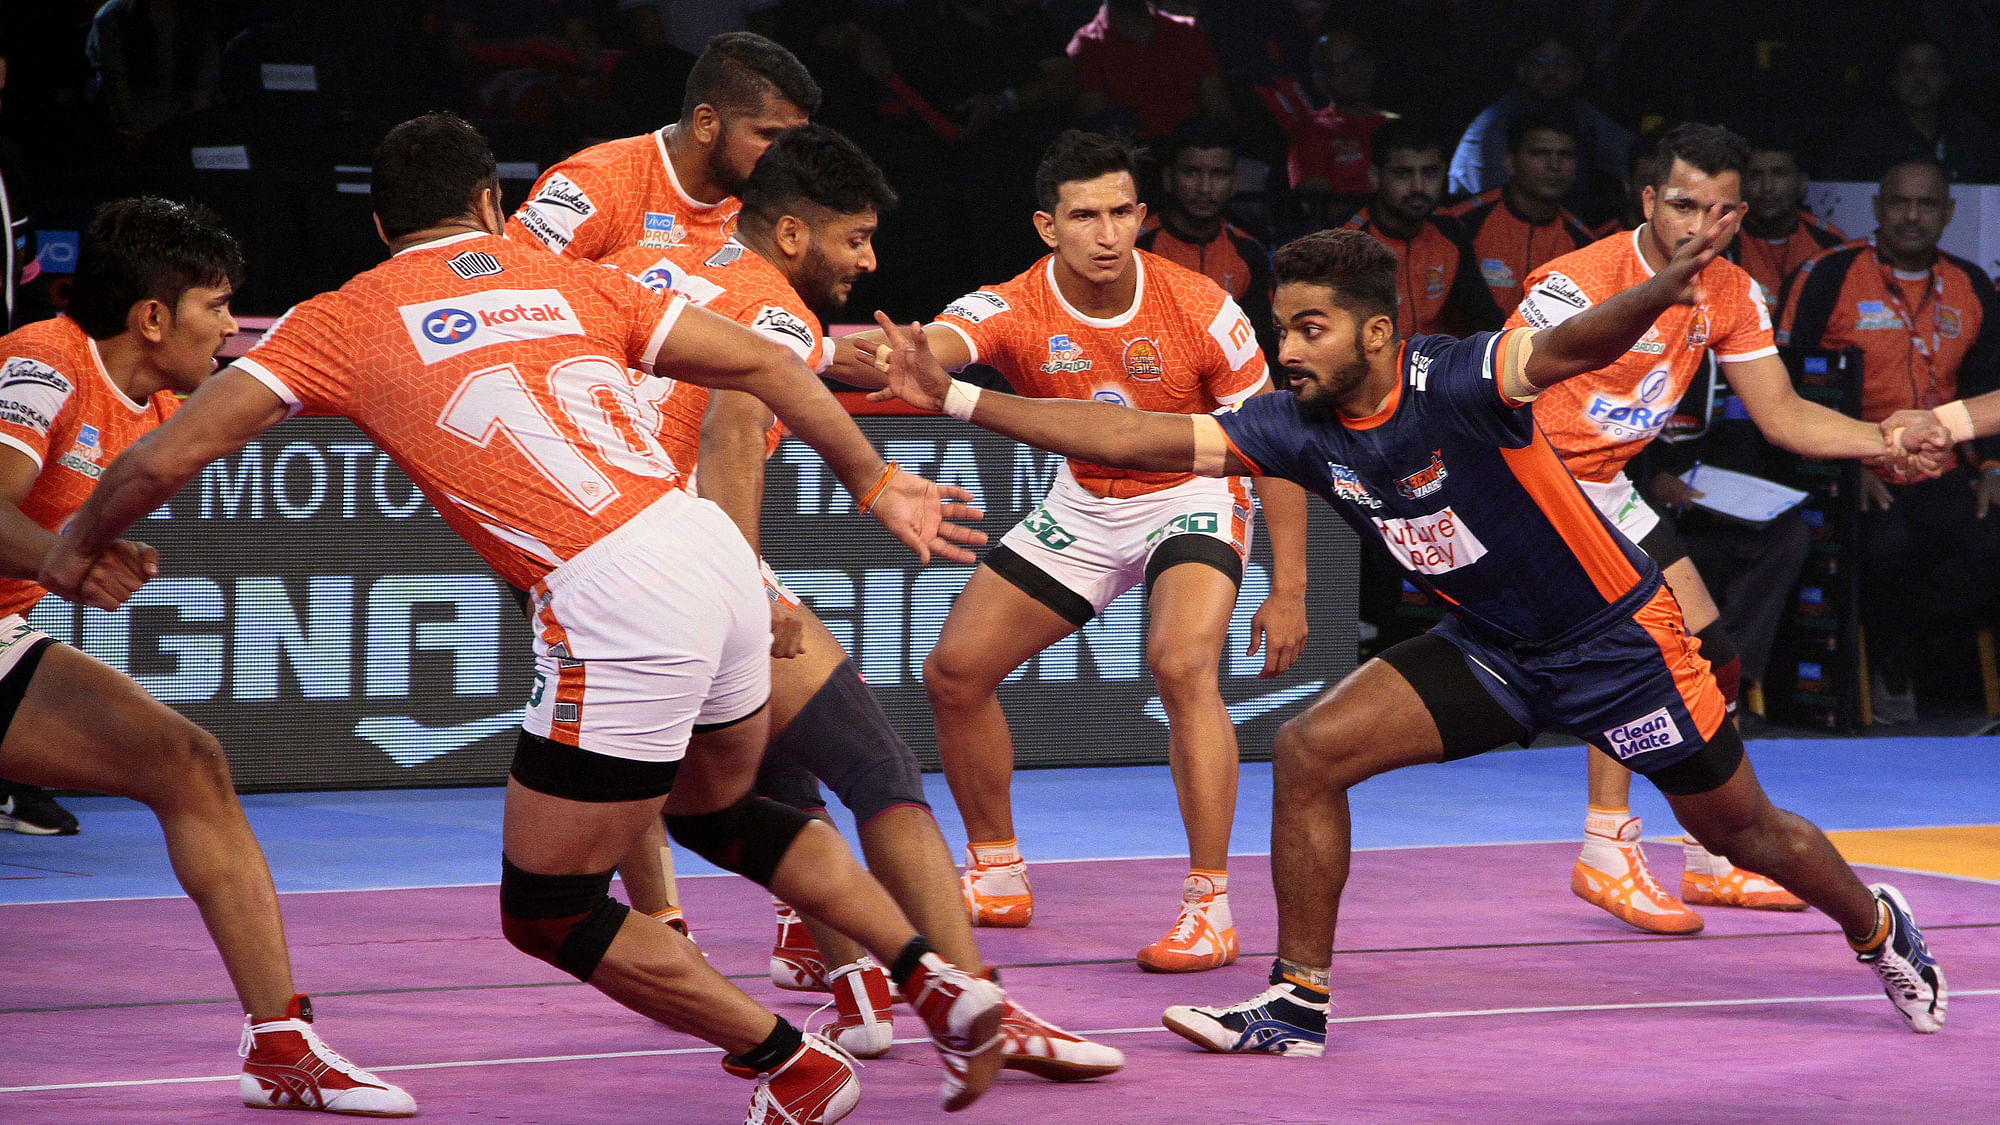 Bengal Warriors defeated Puneri Paltan 26-22 in the Inter Zone Challenge Week match of the Pro Kabaddi League.